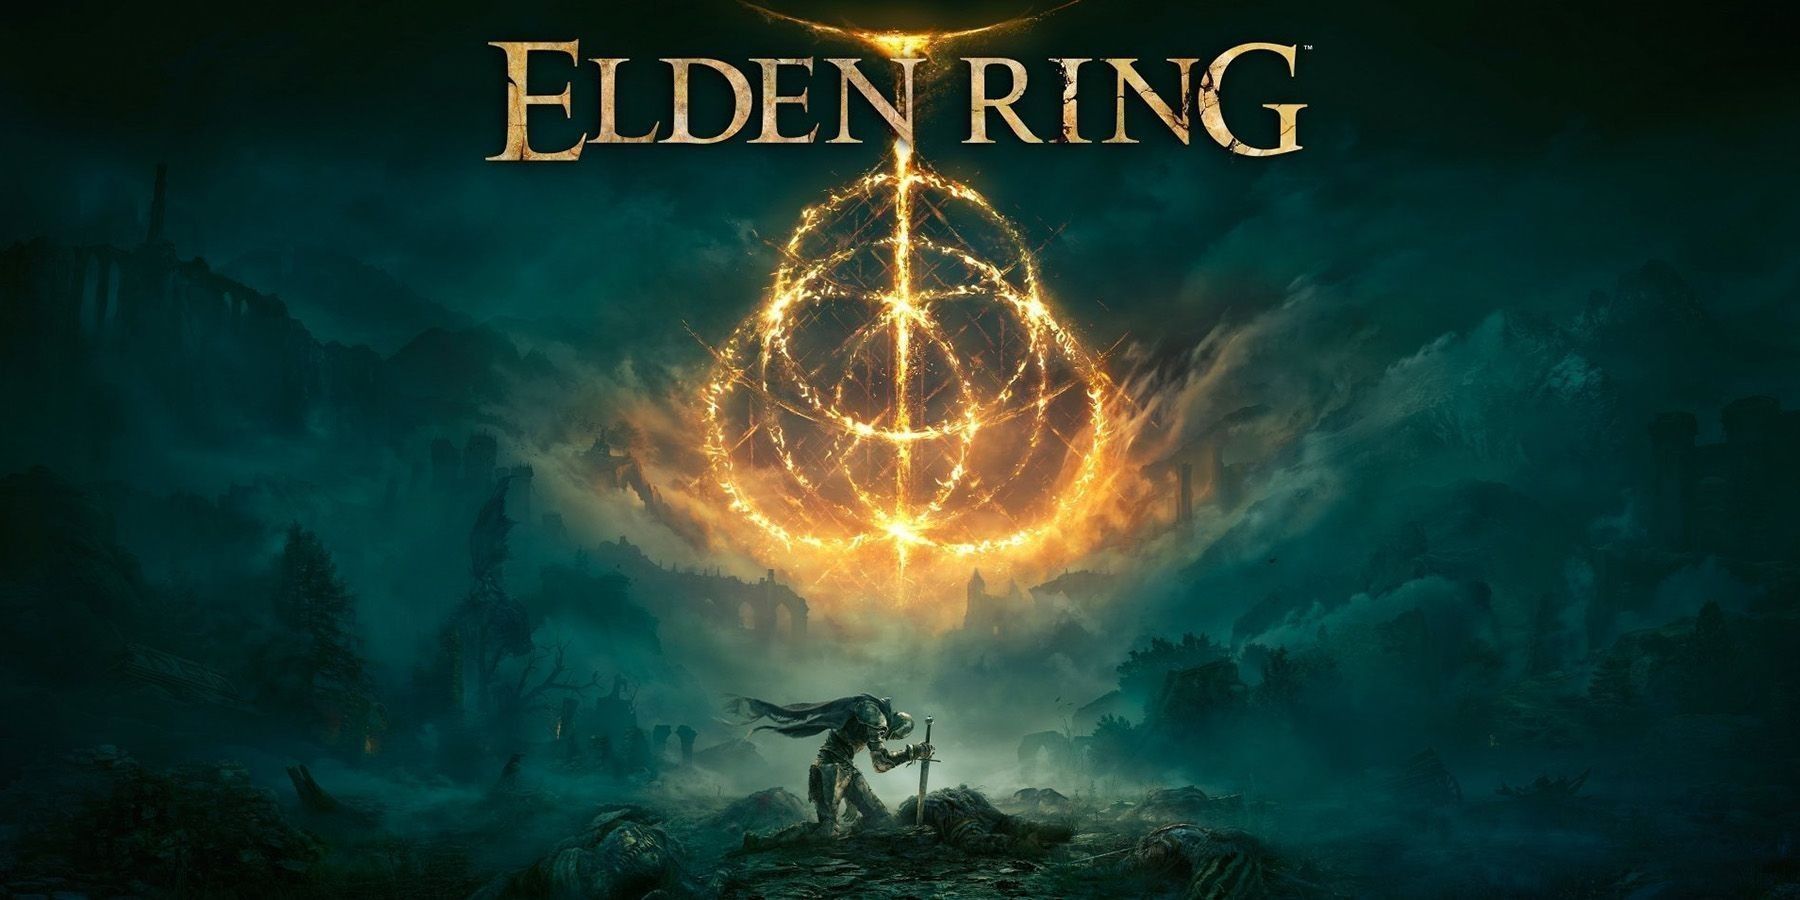 Elden Ring Players Have a Dance-Off in the Middle of a Duel